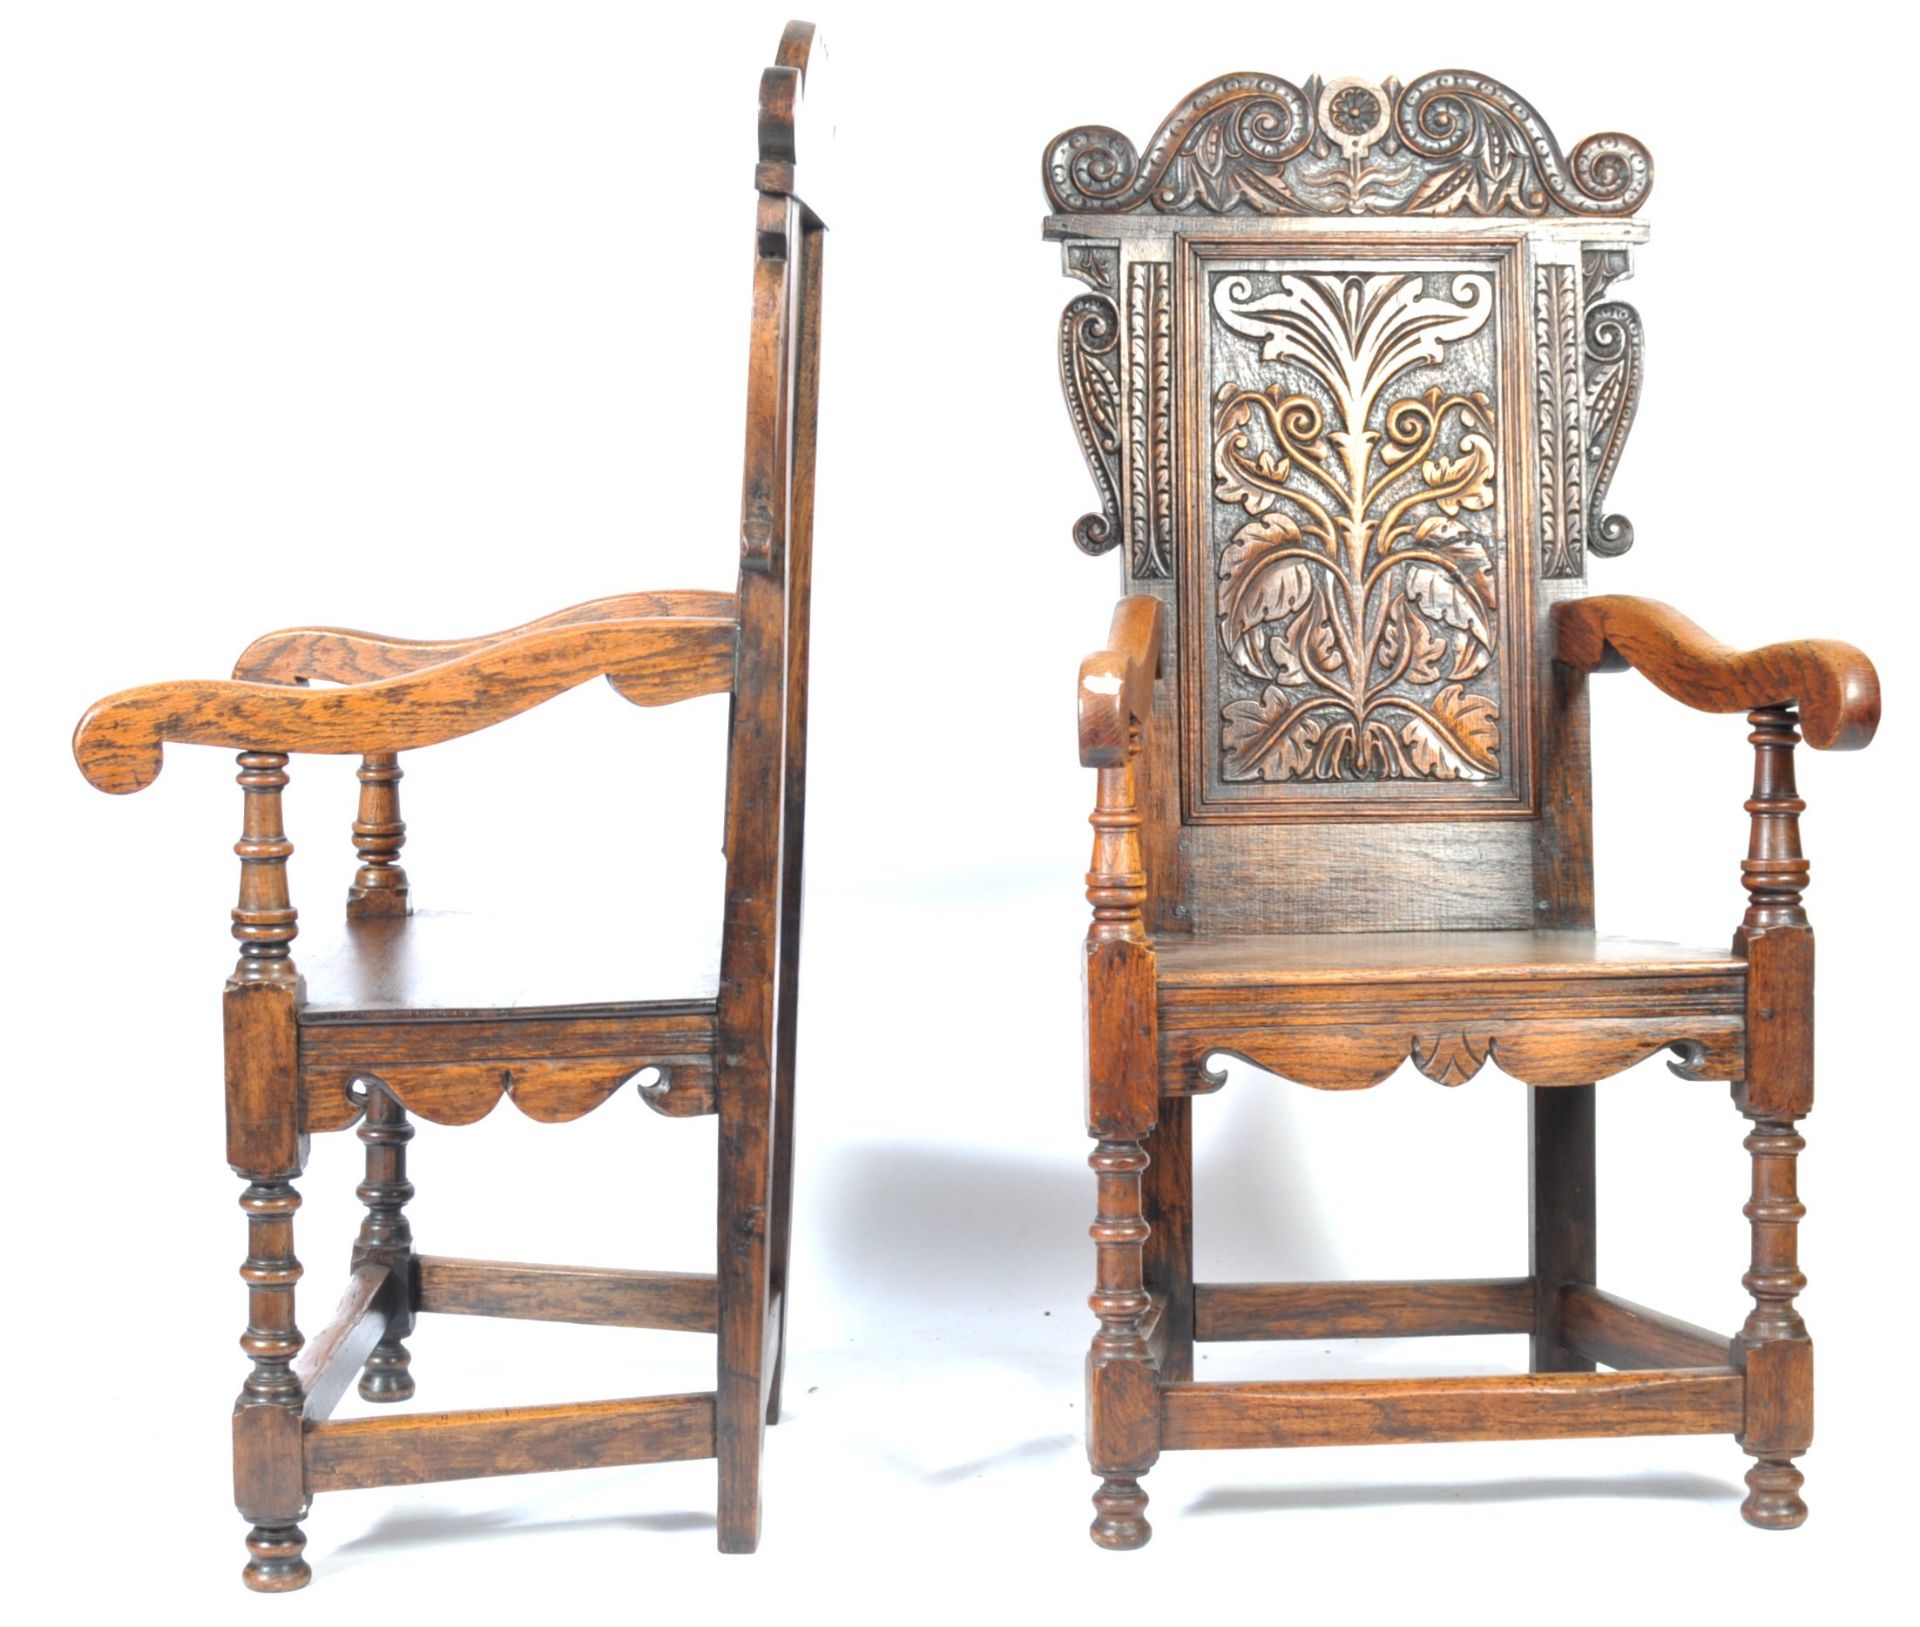 PAIR OF EARLY 20TH CENTURY OAK WAINSCOT CHAIRS - Image 3 of 6